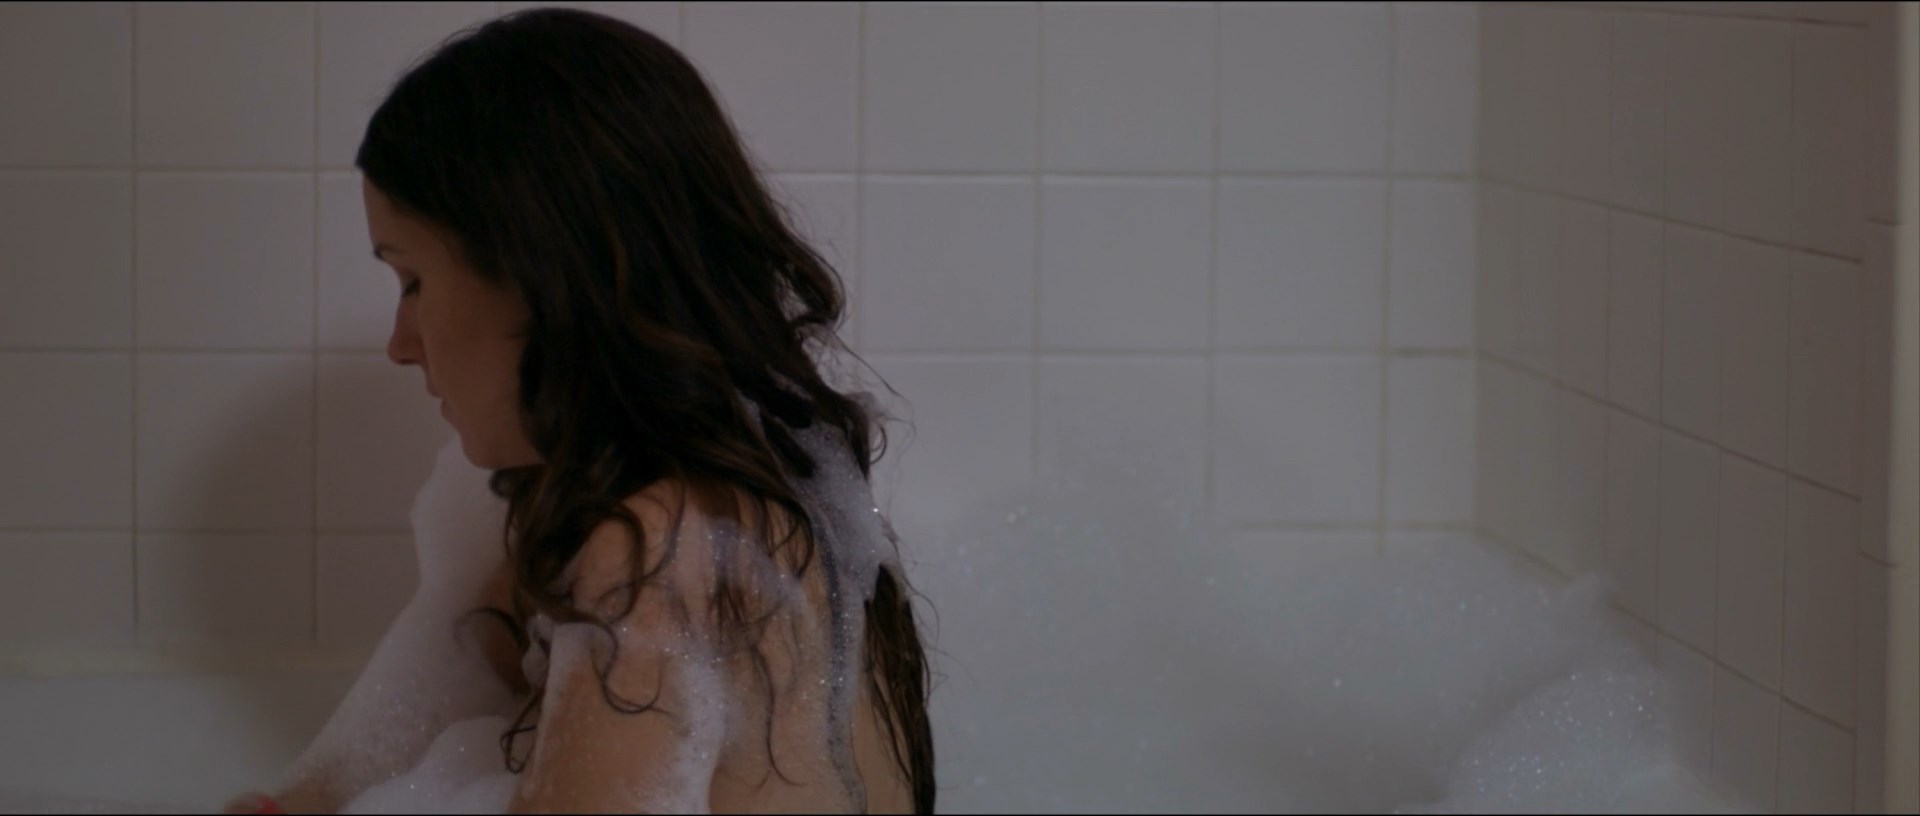 Shannon Woodward is taking a bath, no nudity tho.